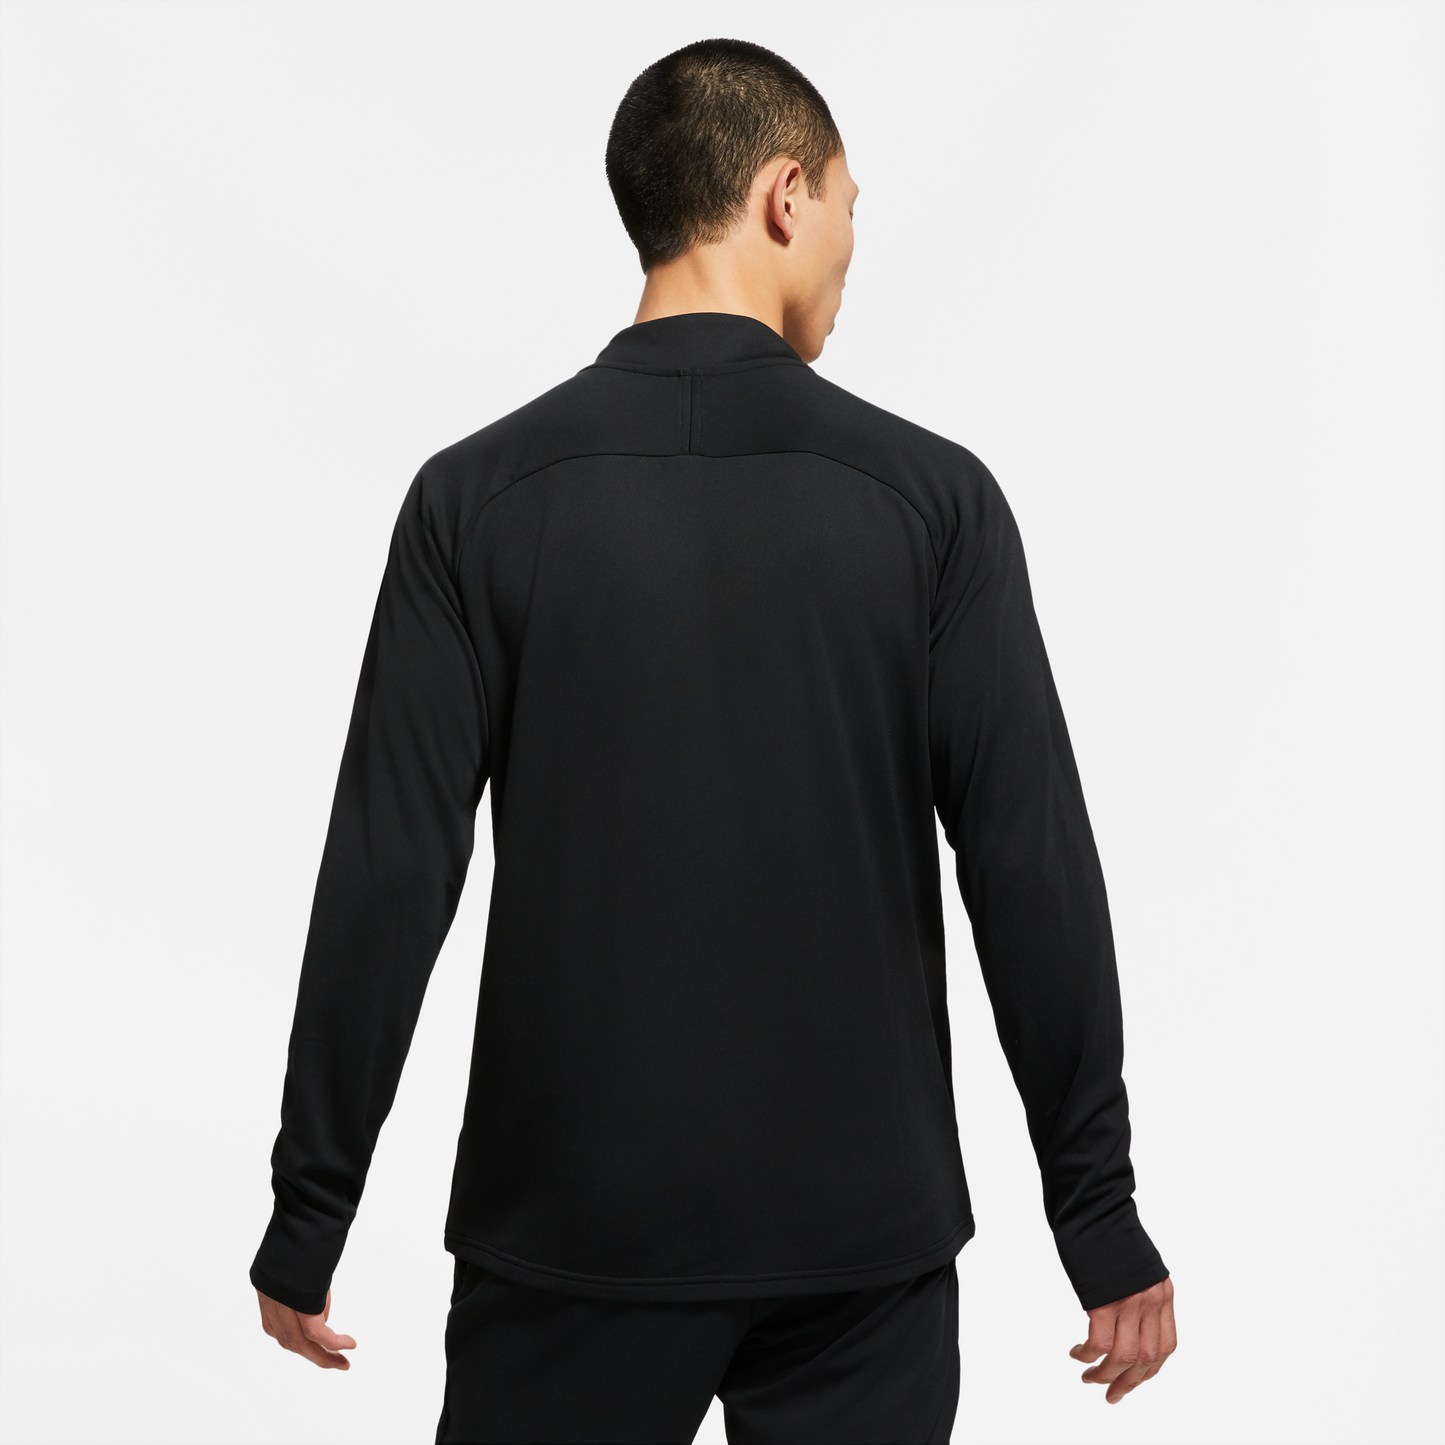 NIKE ACADEMY 21 DRILL TOP - MENS